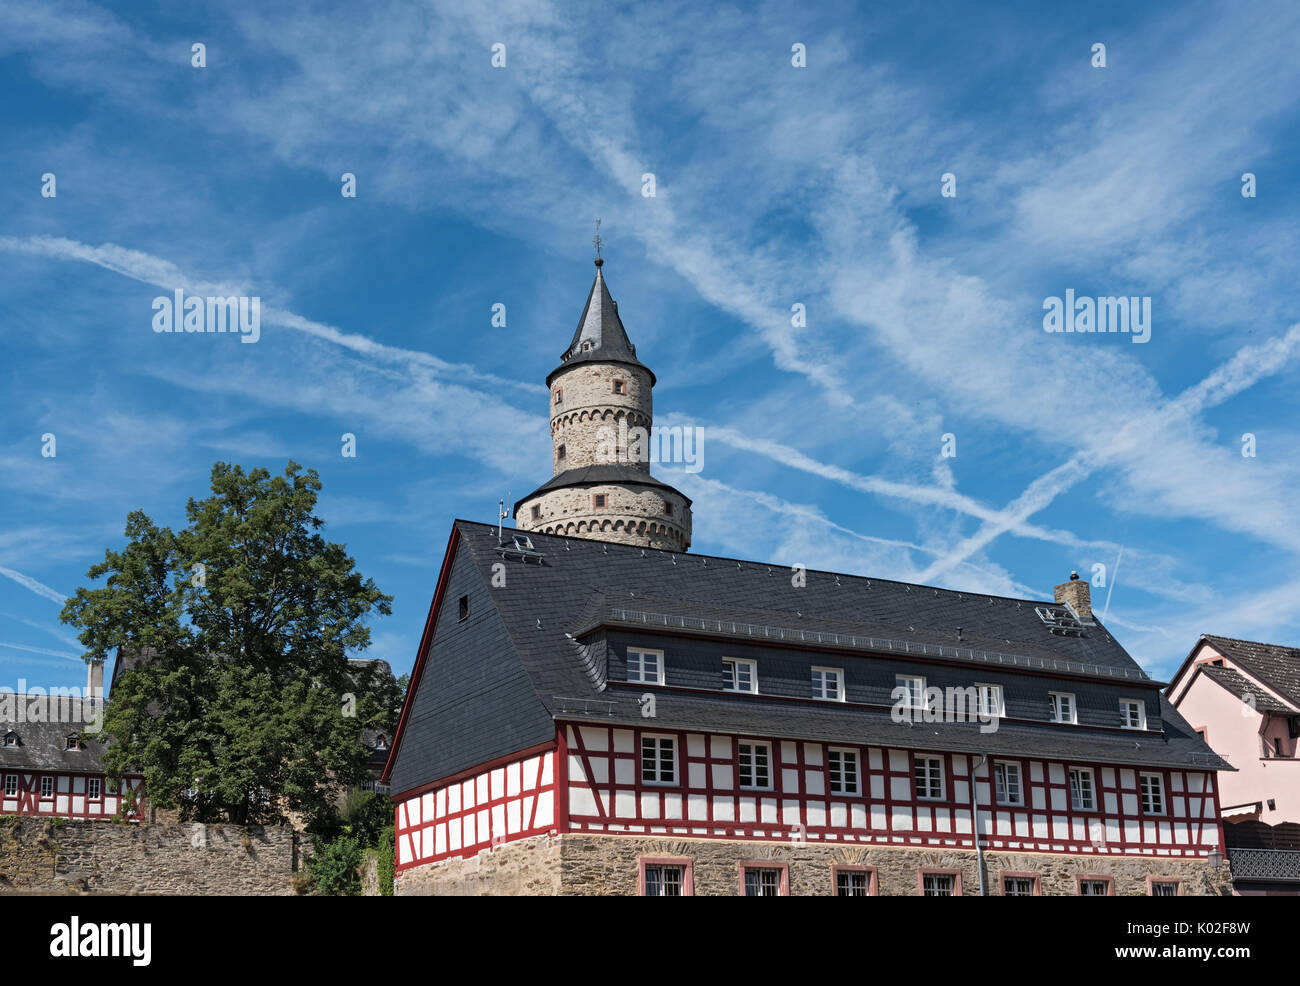 The Renaissance castle Idstein with a witch tower Stock Photo